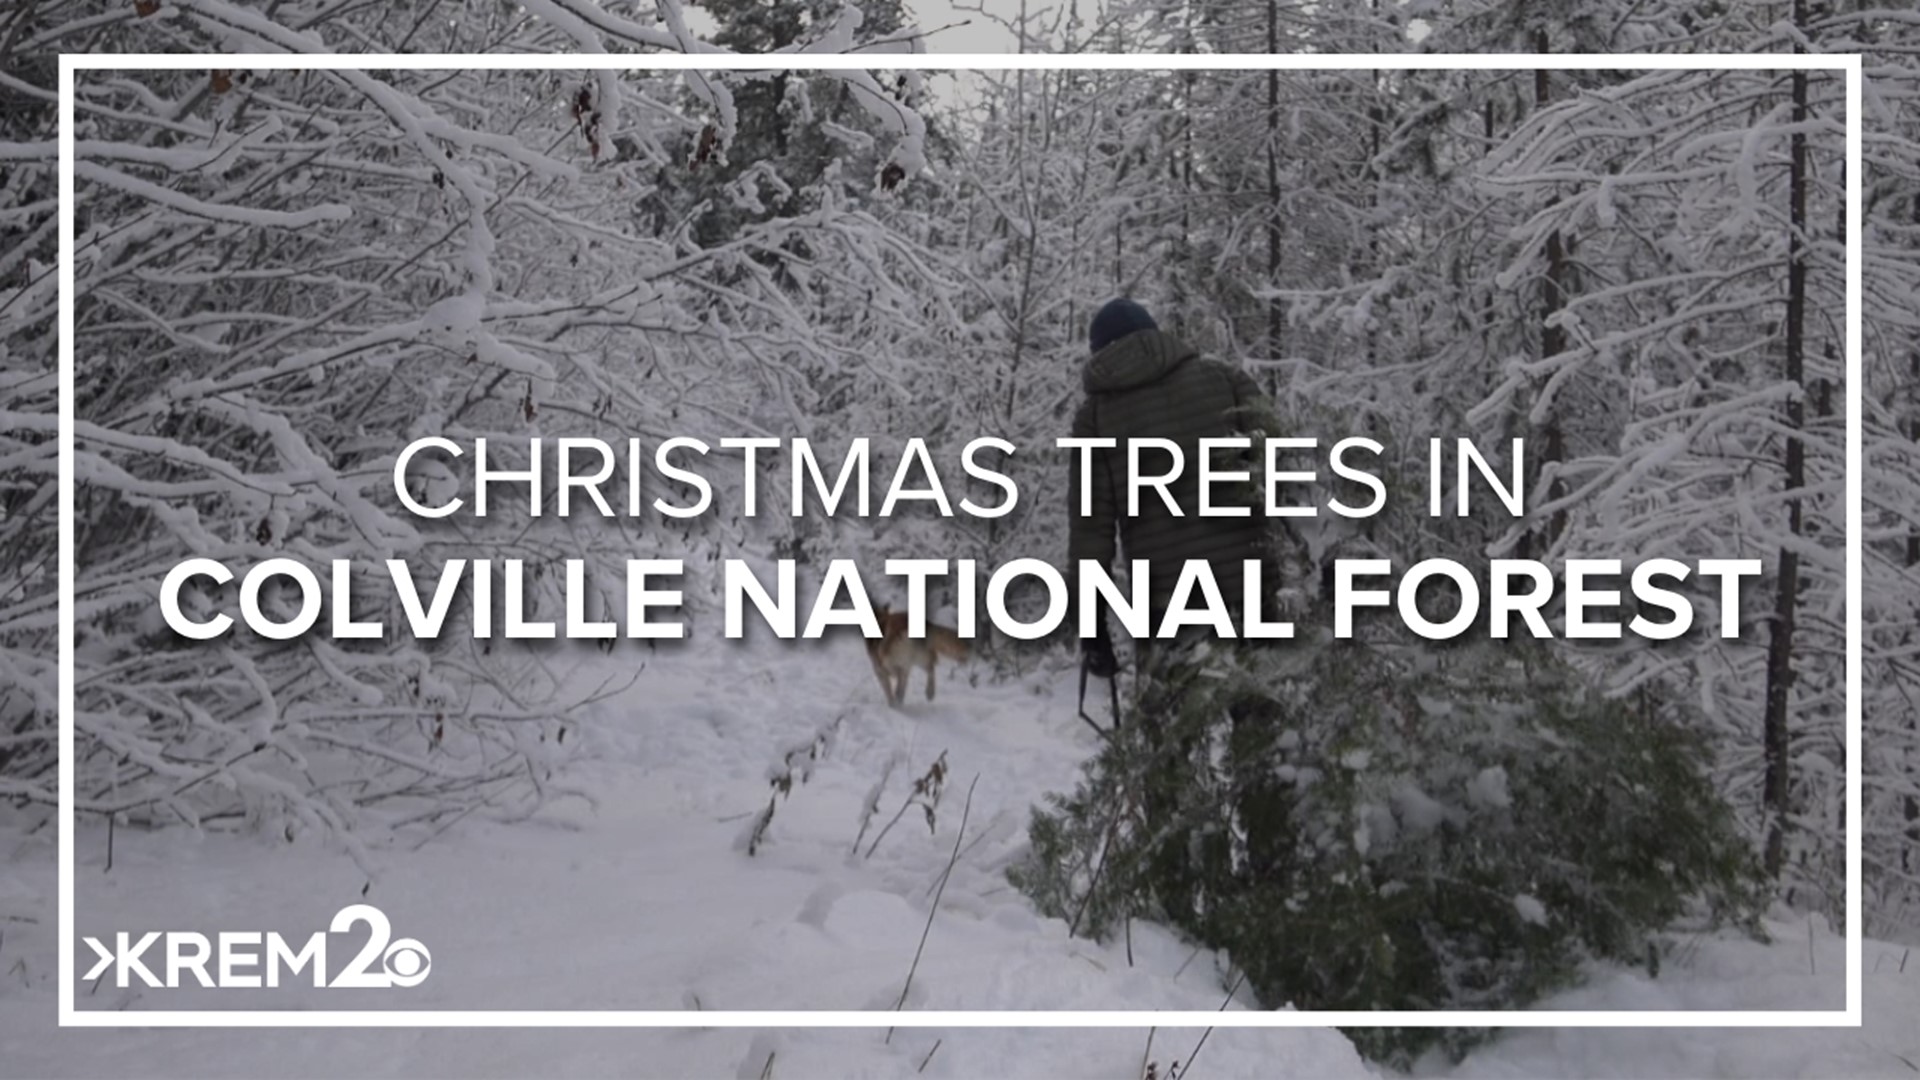 Permits are available to cut down your own Christmas tree. Jeremy LaGoo explains how getting out and cutting down the tree can help the forests.